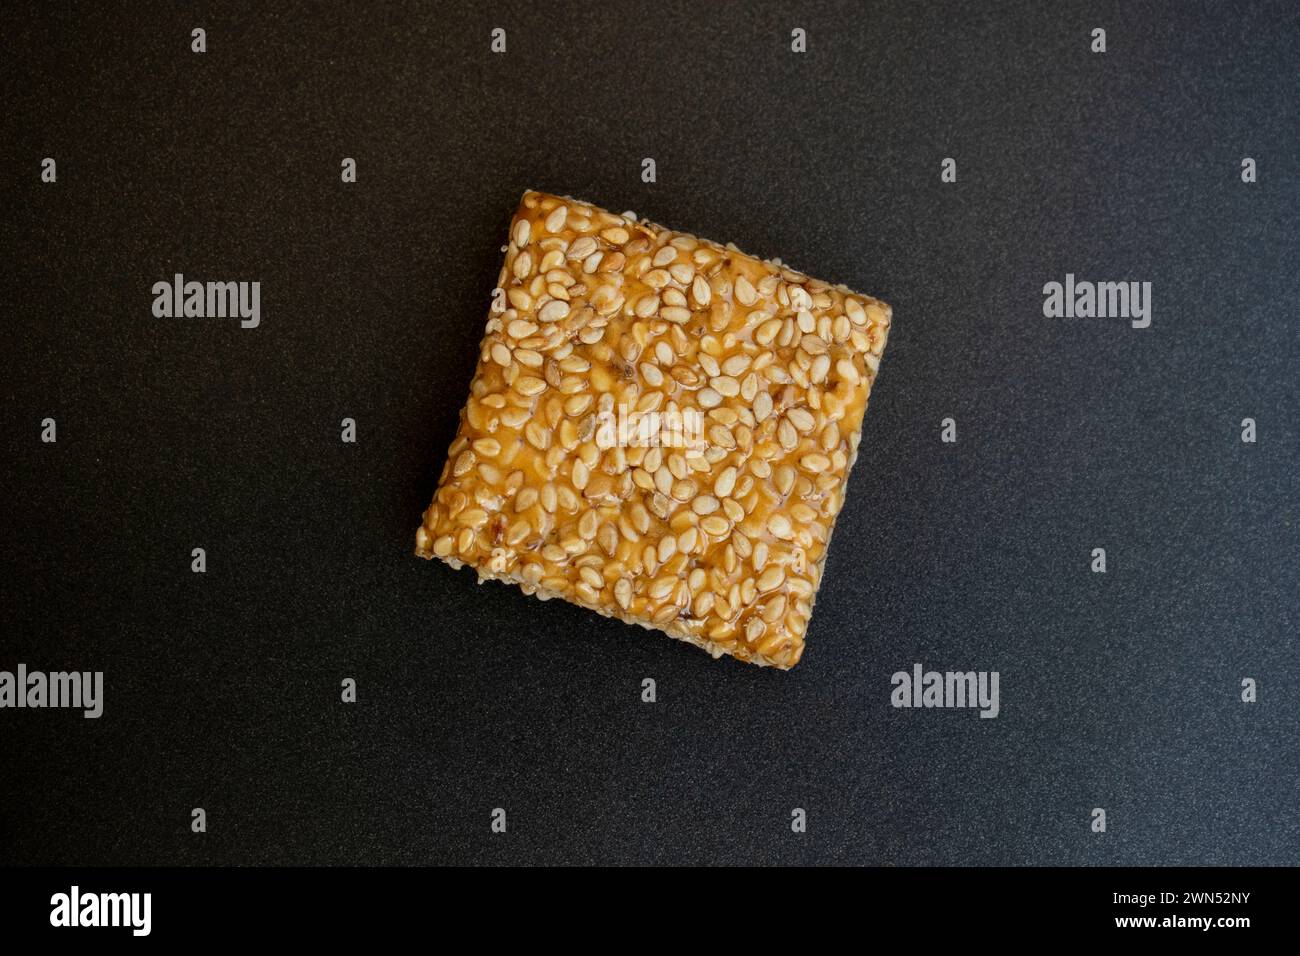 Til chikki on black gray background. Til chikki is an Indian sweets dishes made with jaggery and sesame. Indian festival makar sankranti special sweet Stock Photo